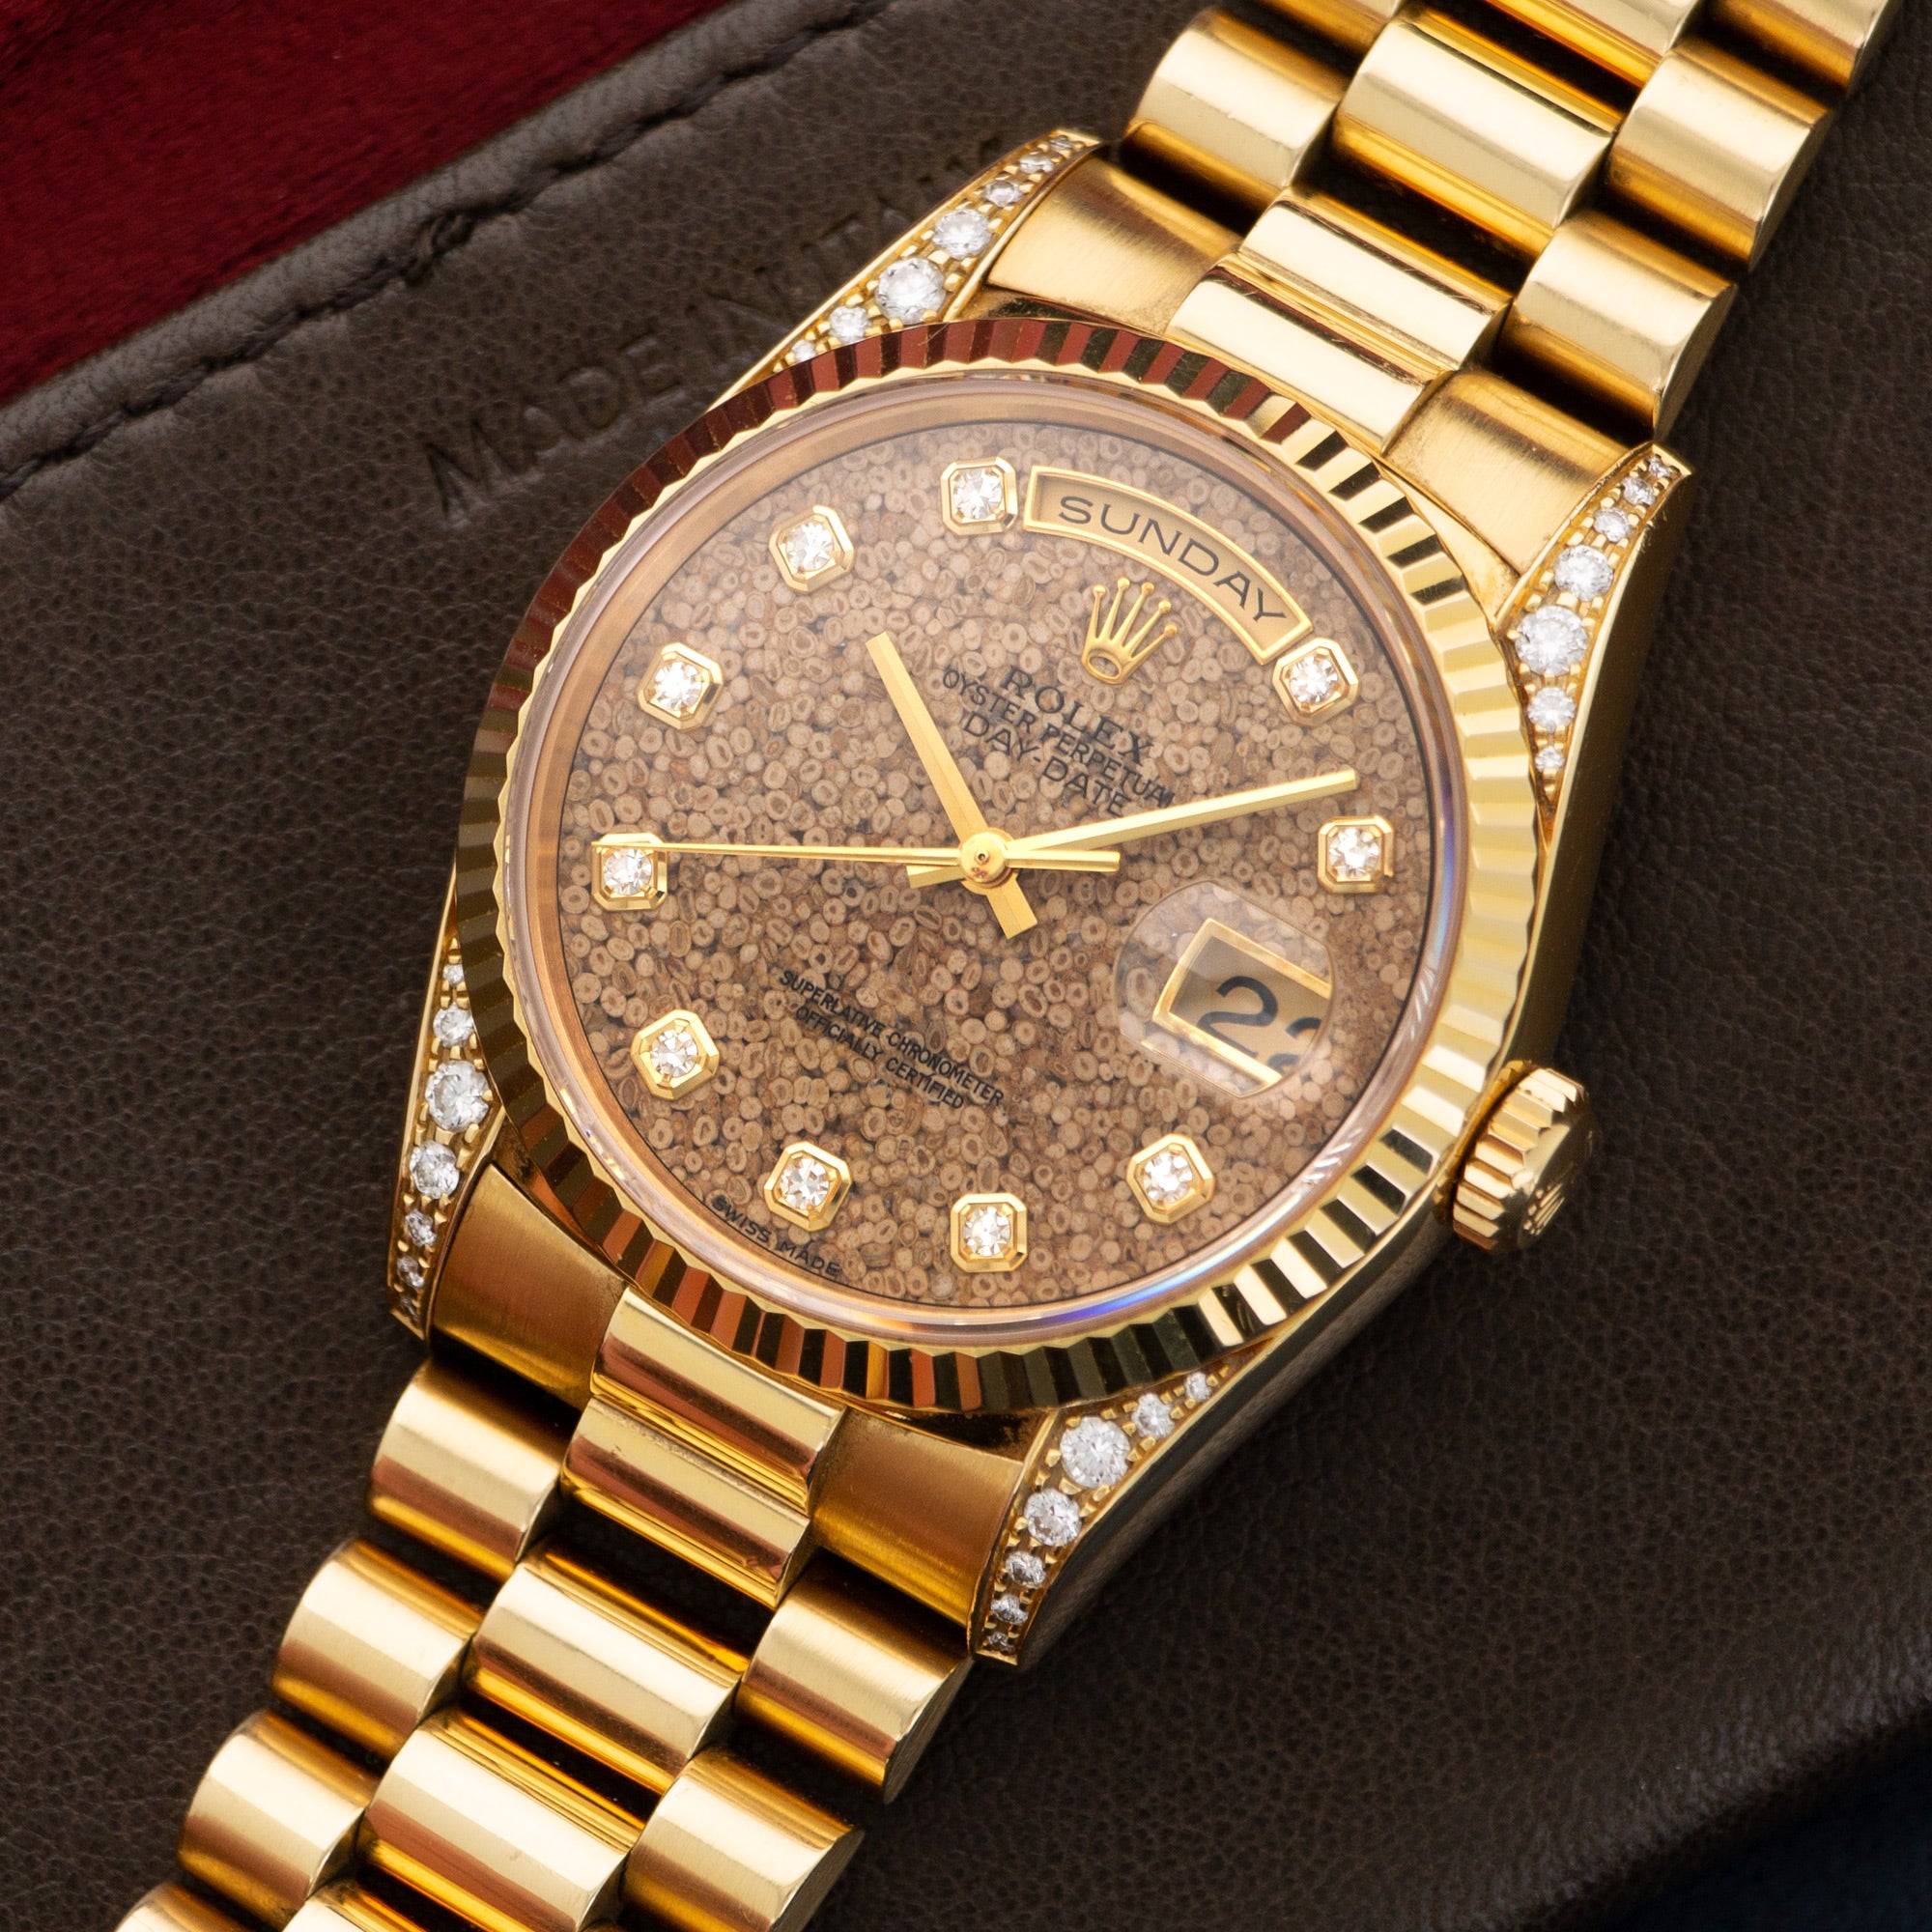 Rolex - Rolex Yellow Gold Day-Date Fossil Dial Watch Ref. 18238, Nicknamed the Jurassic Park - The Keystone Watches